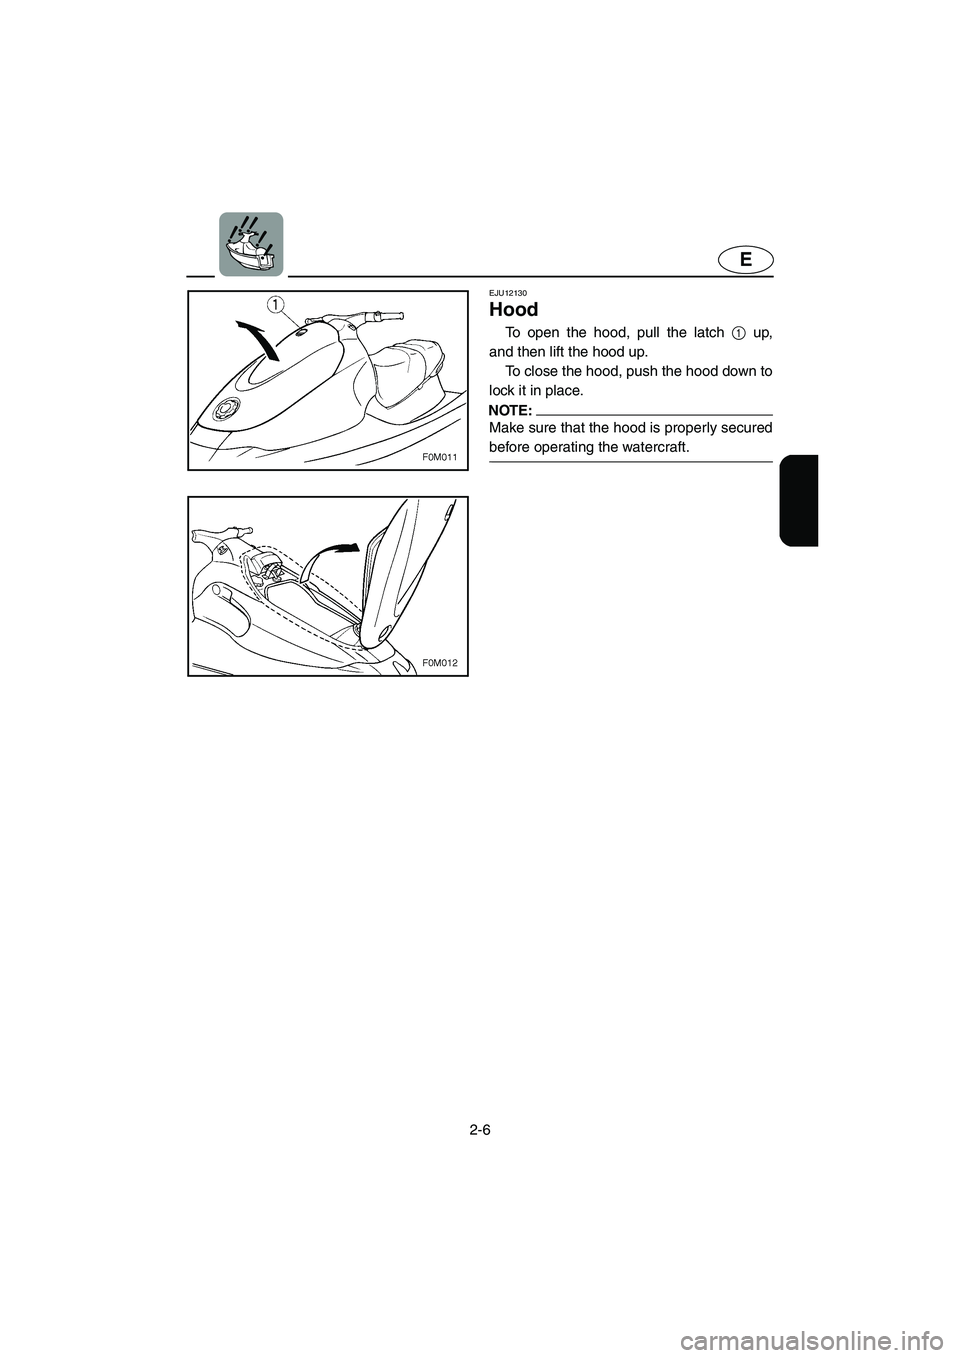 YAMAHA XL 700 2005  Owners Manual 2-6
E
EJU12130 
Hood  
To open the hood, pull the latch 1 up,
and then lift the hood up. 
To close the hood, push the hood down to
lock it in place. 
NOTE:@ Make sure that the hood is properly secured